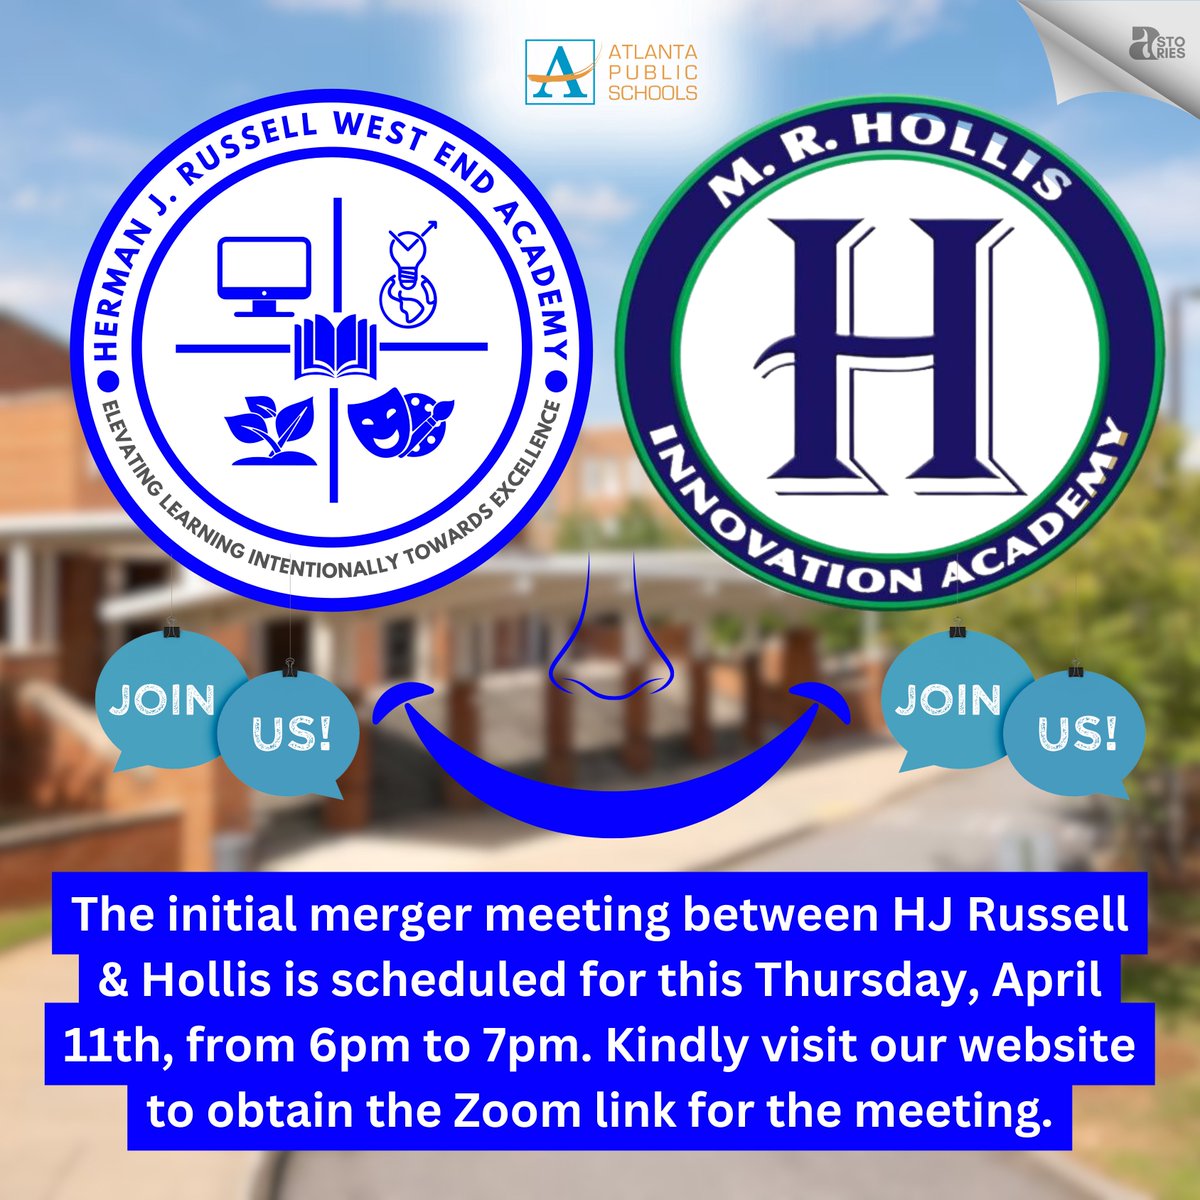 The initial merger meeting between HJ Russell & Hollis is scheduled for this Thursday, April 11th, from 6 pm to 7 pm. Kindly visit our website to obtain the Zoom link for the meeting. atlantapublicschools.us/hermanjrussell @TDGreen_ @DRVENZEN_aps @apsupdate @Retha_Woolfolk @HRWEACOUNSELING